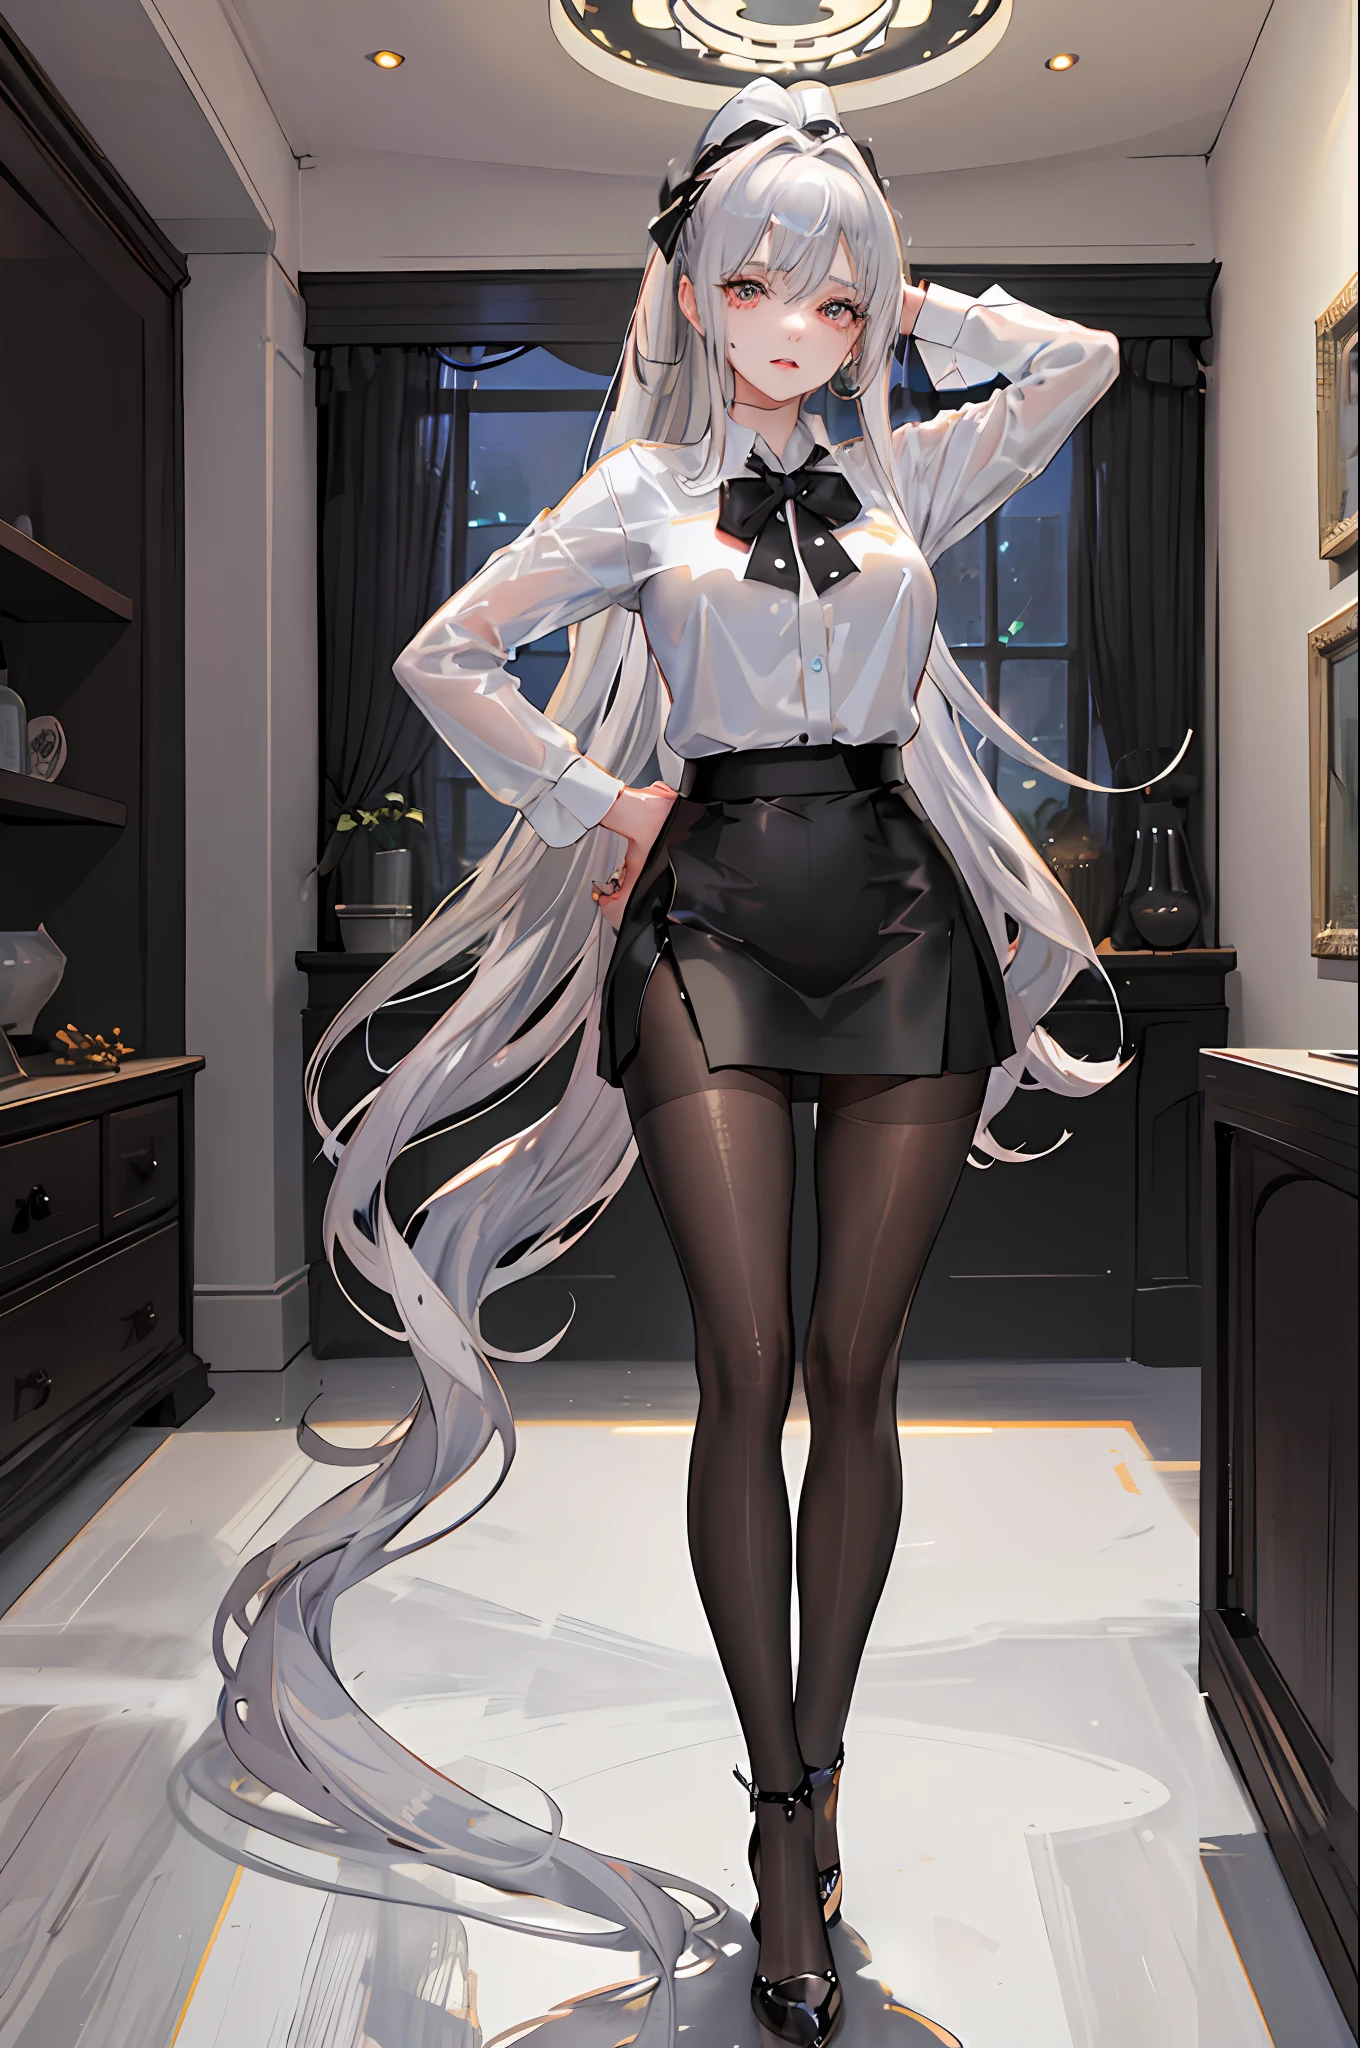 (((1 girl)),ray tracing,(dim lighting),[detailed background (living room)),((silver hair)),(silver hair)),(fluffy silver hair, plump and slender girl)) with high ponytail))) Avoid golden eyes in the ominous living room ((((Girl wears a white shirt, black wrinkled skirt with black transparent pantyhose), showing a delicate slender figure and graceful curves, correct limbs, hands behind the head, both hands behind the head